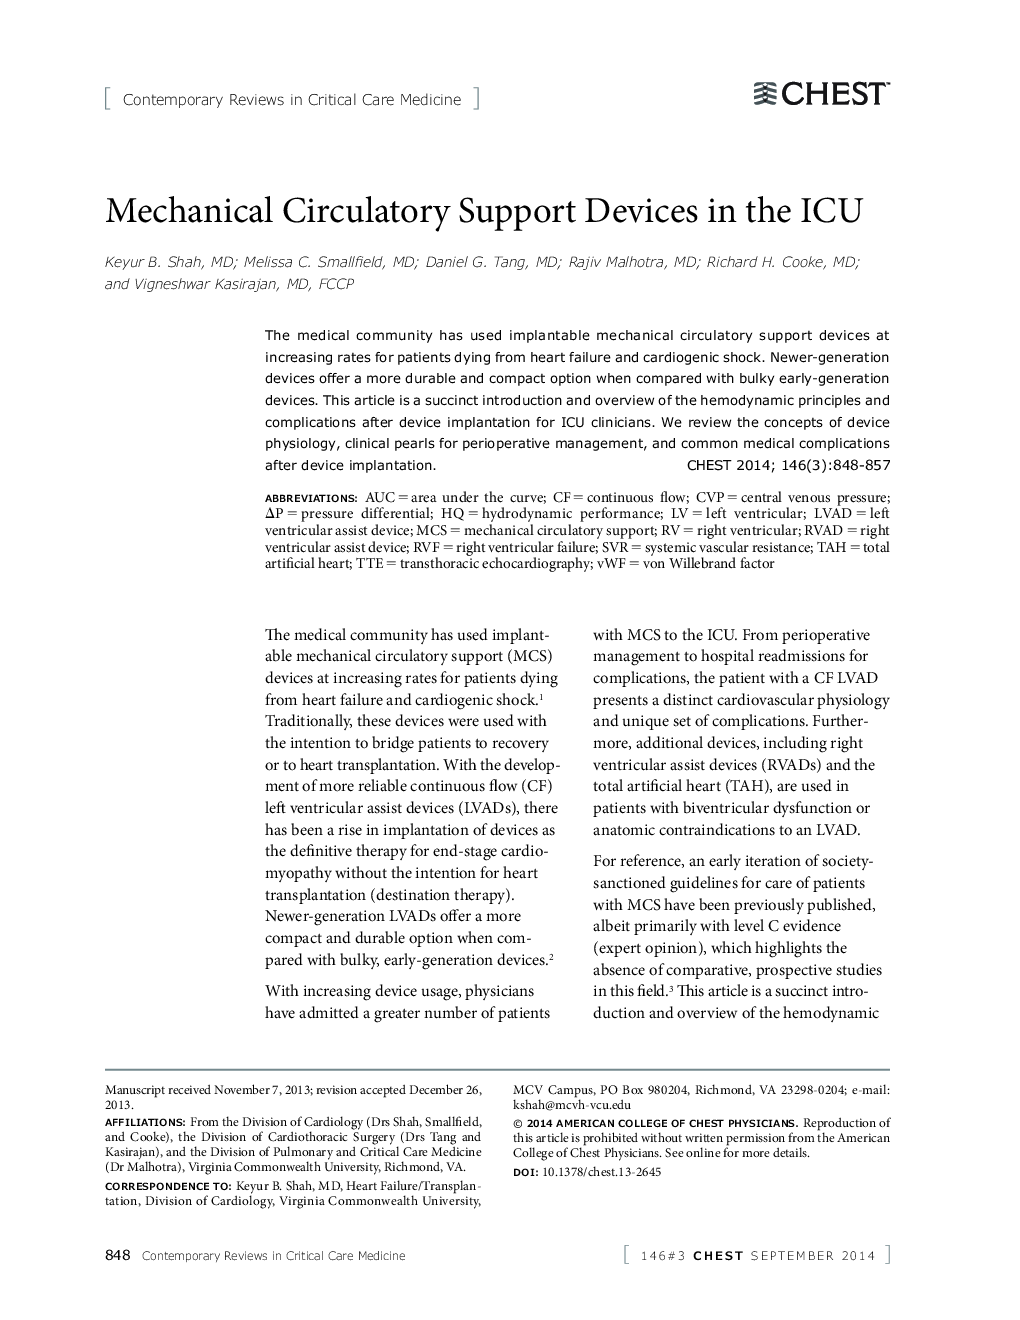 Mechanical Circulatory Support Devices in the ICU 